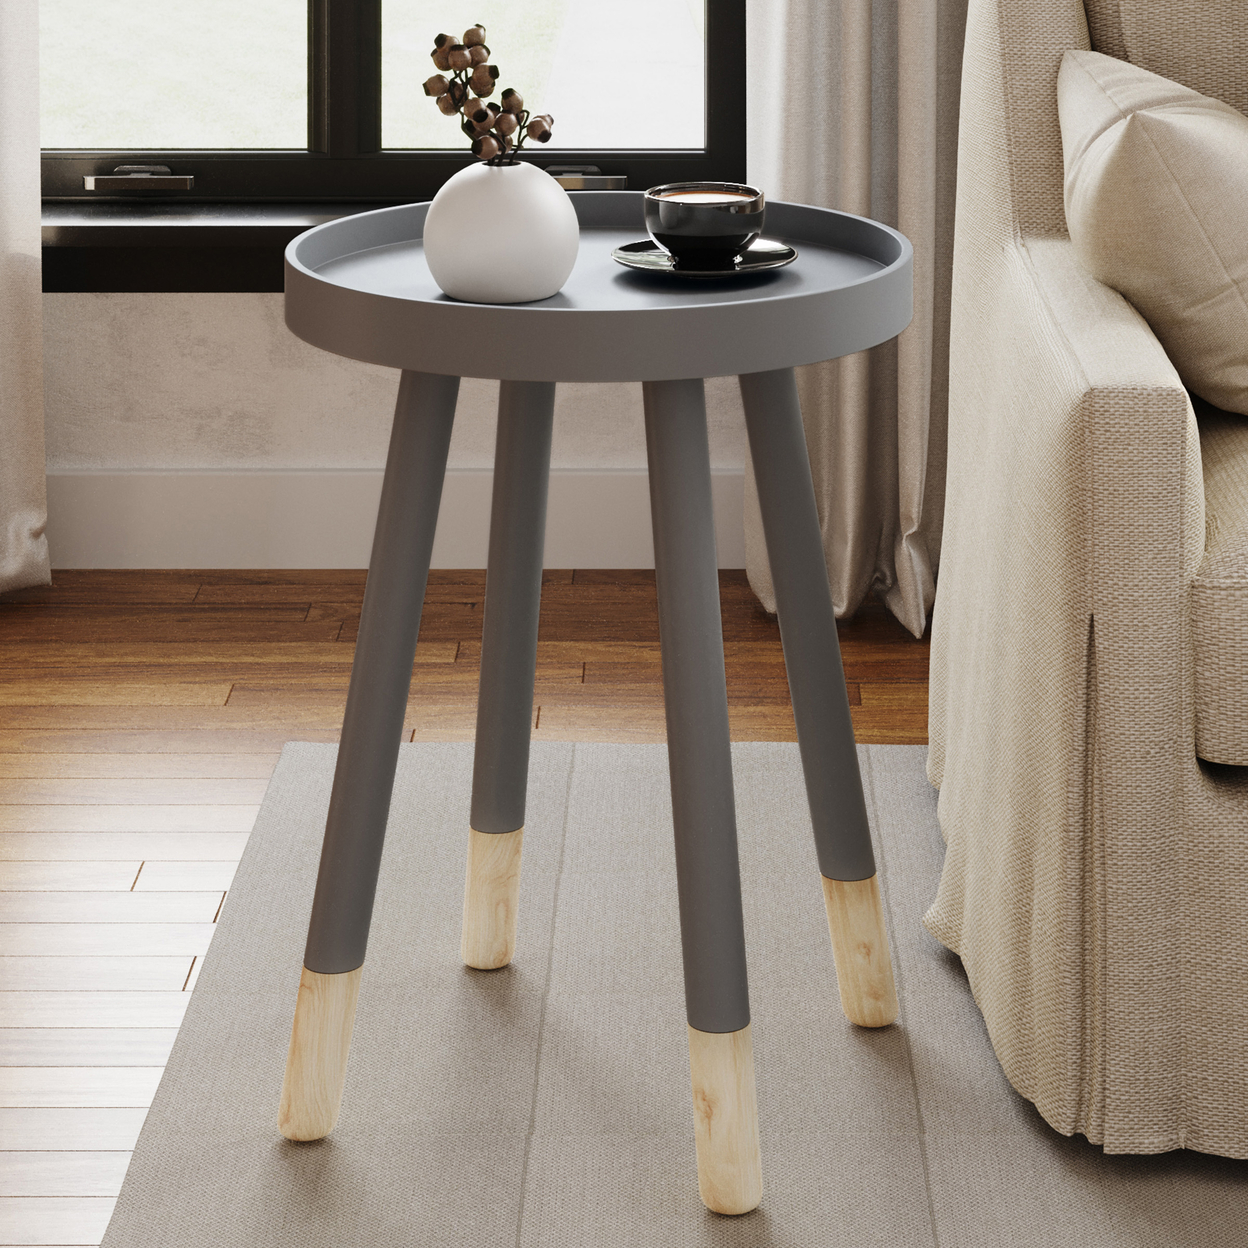 Round End Table Wooden Mid-Century Modern Side Table Living Room Furniture Gray